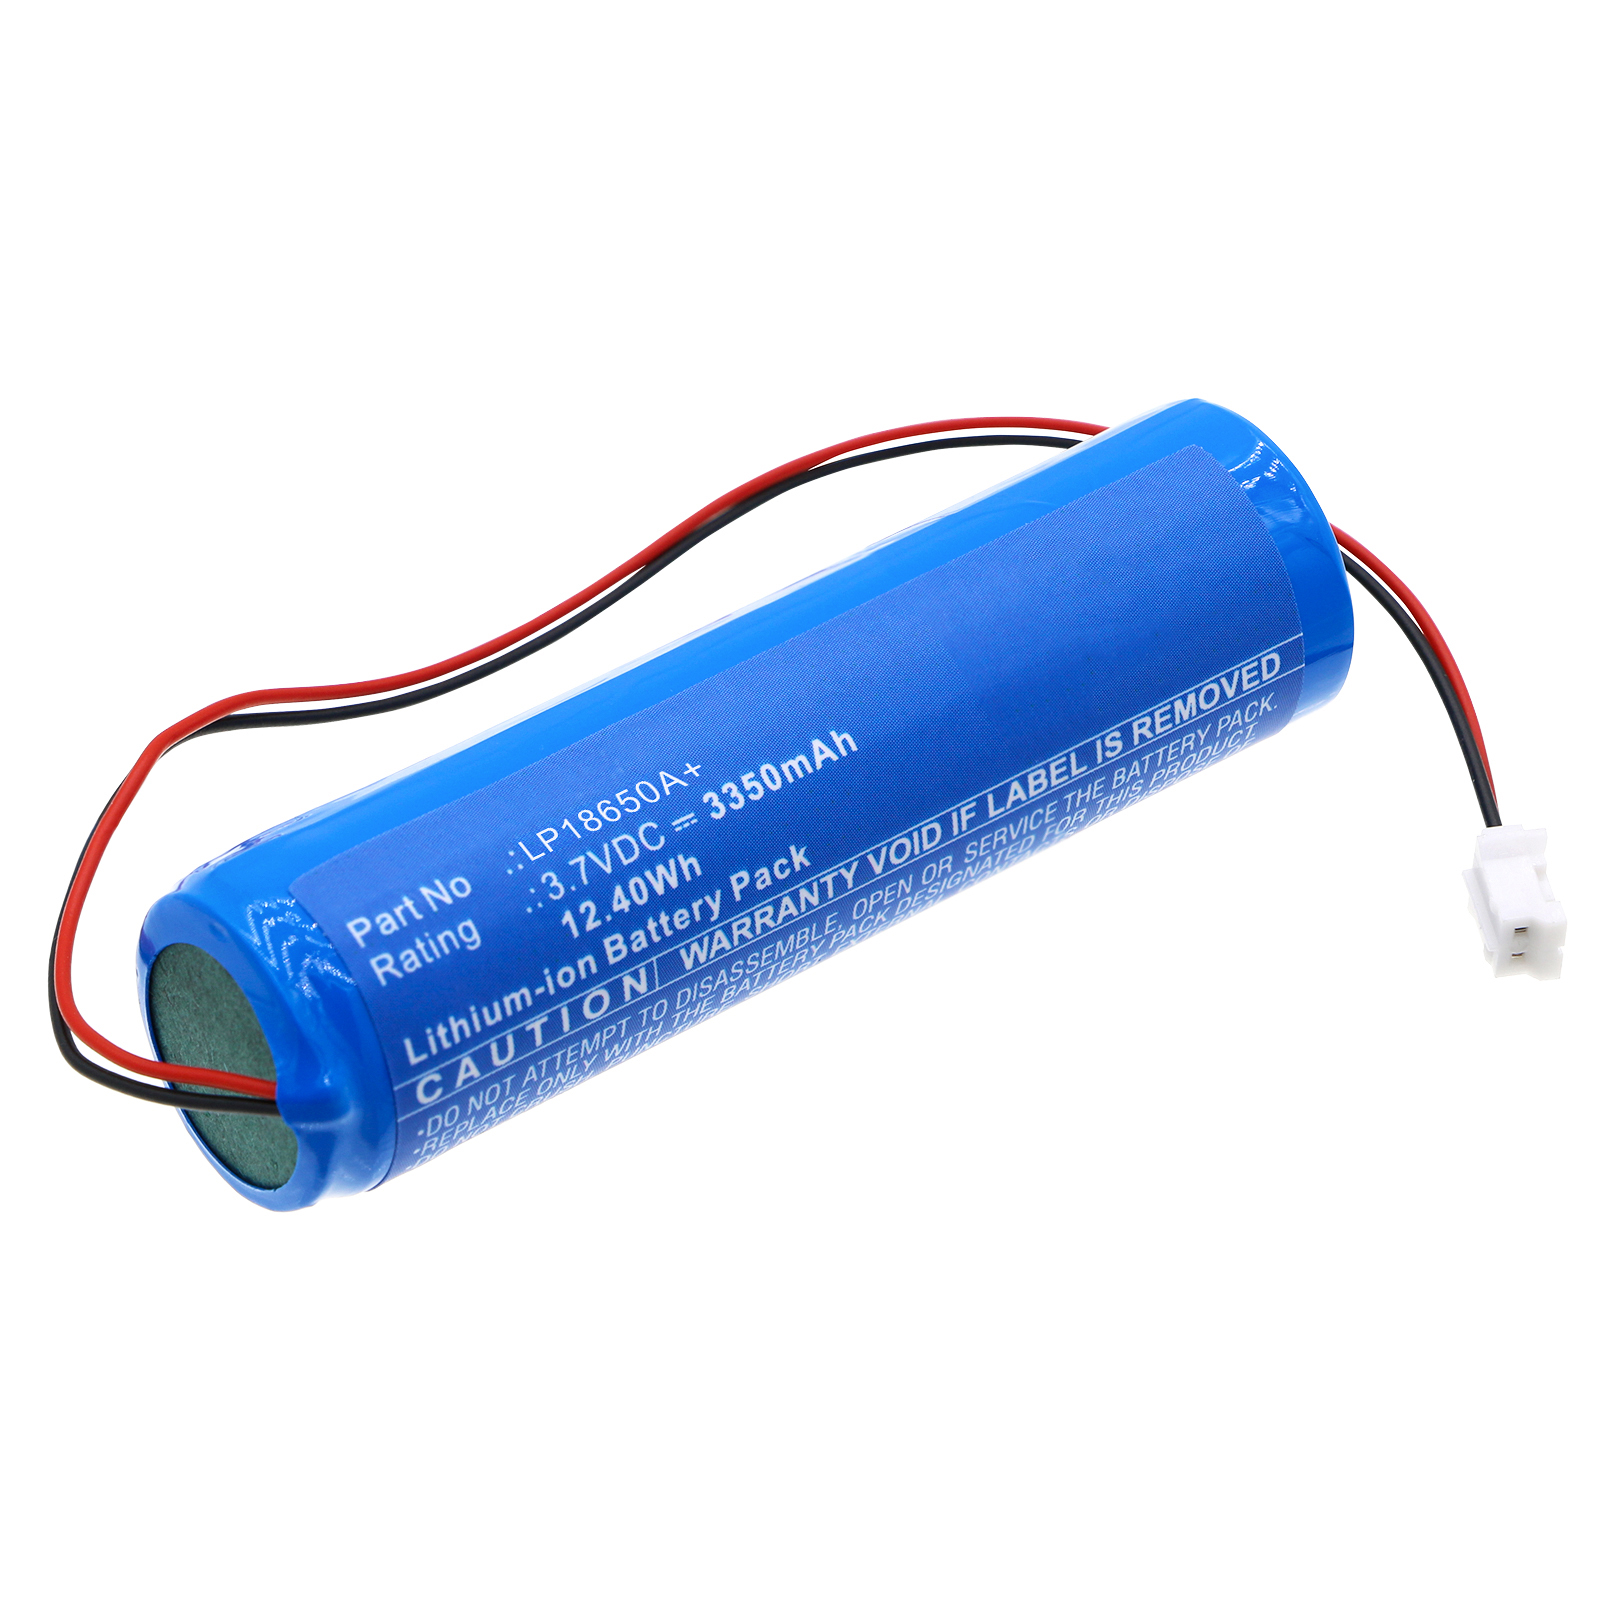 Synergy Digital Equipment Battery, Compatible with Drager LP18650A+ Equipment Battery (Li-ion, 3.7V, 3350mAh)